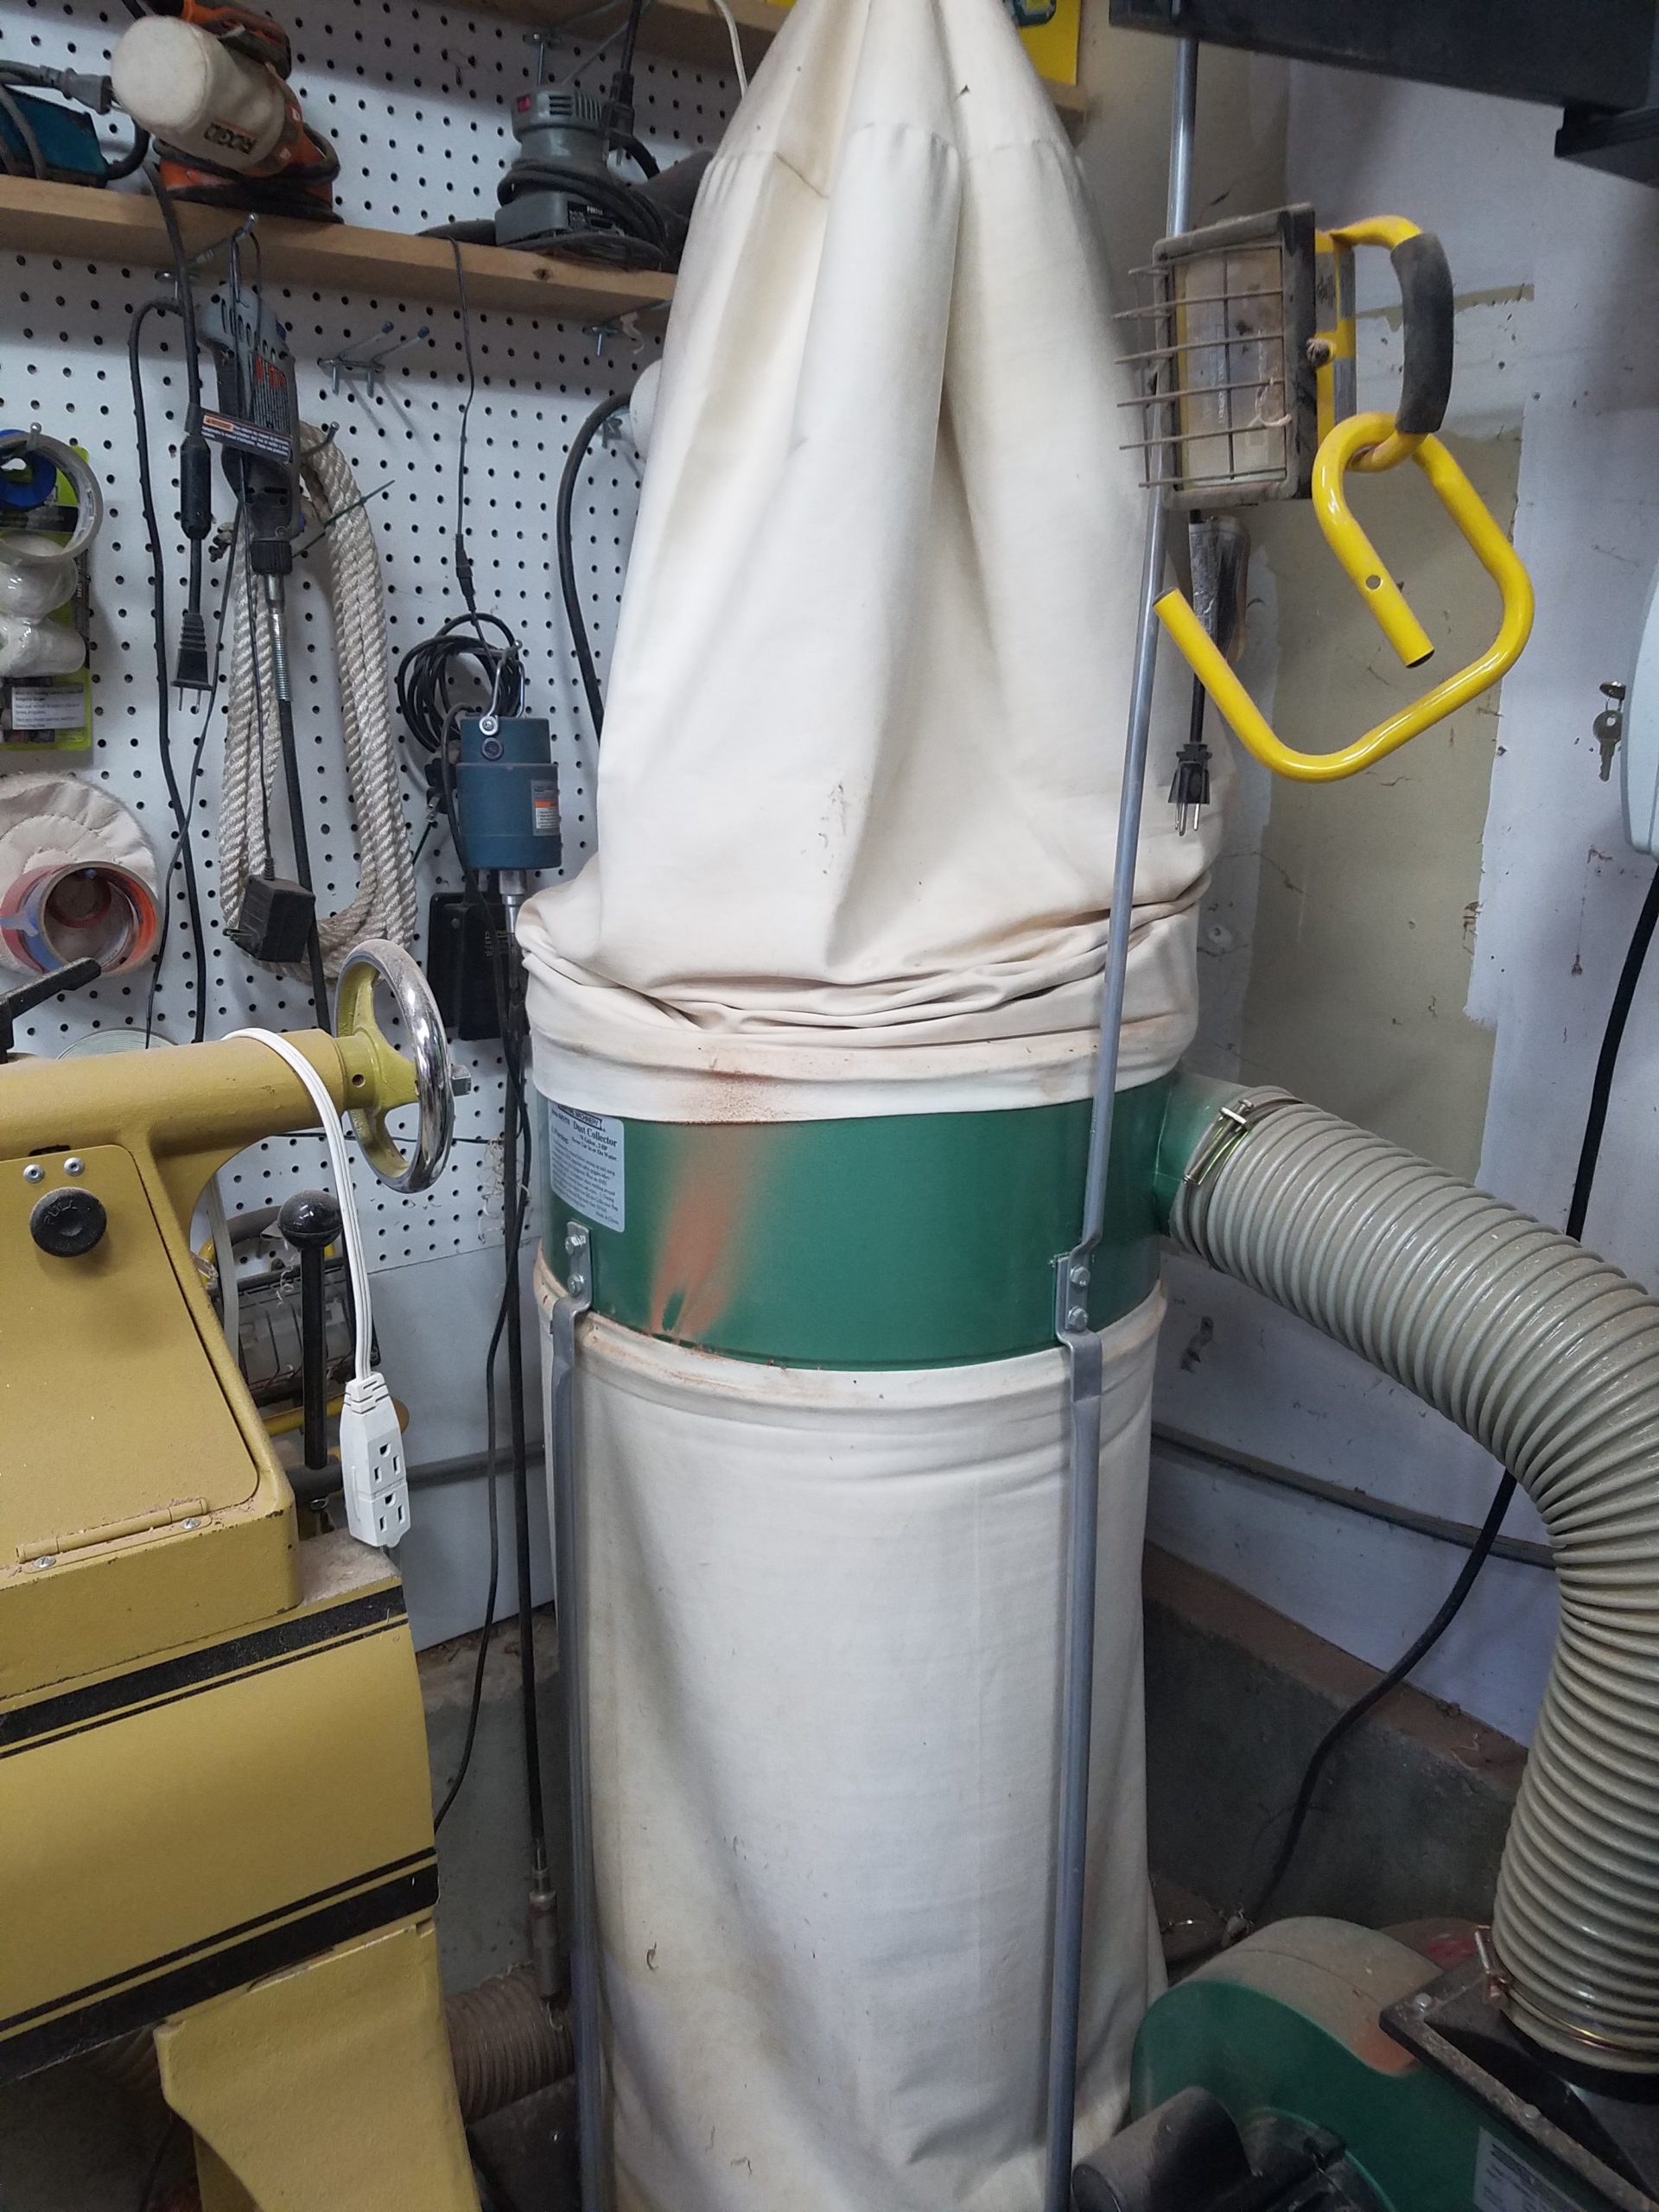 My dust collector before I change out the cloth dust filter and dust bag.